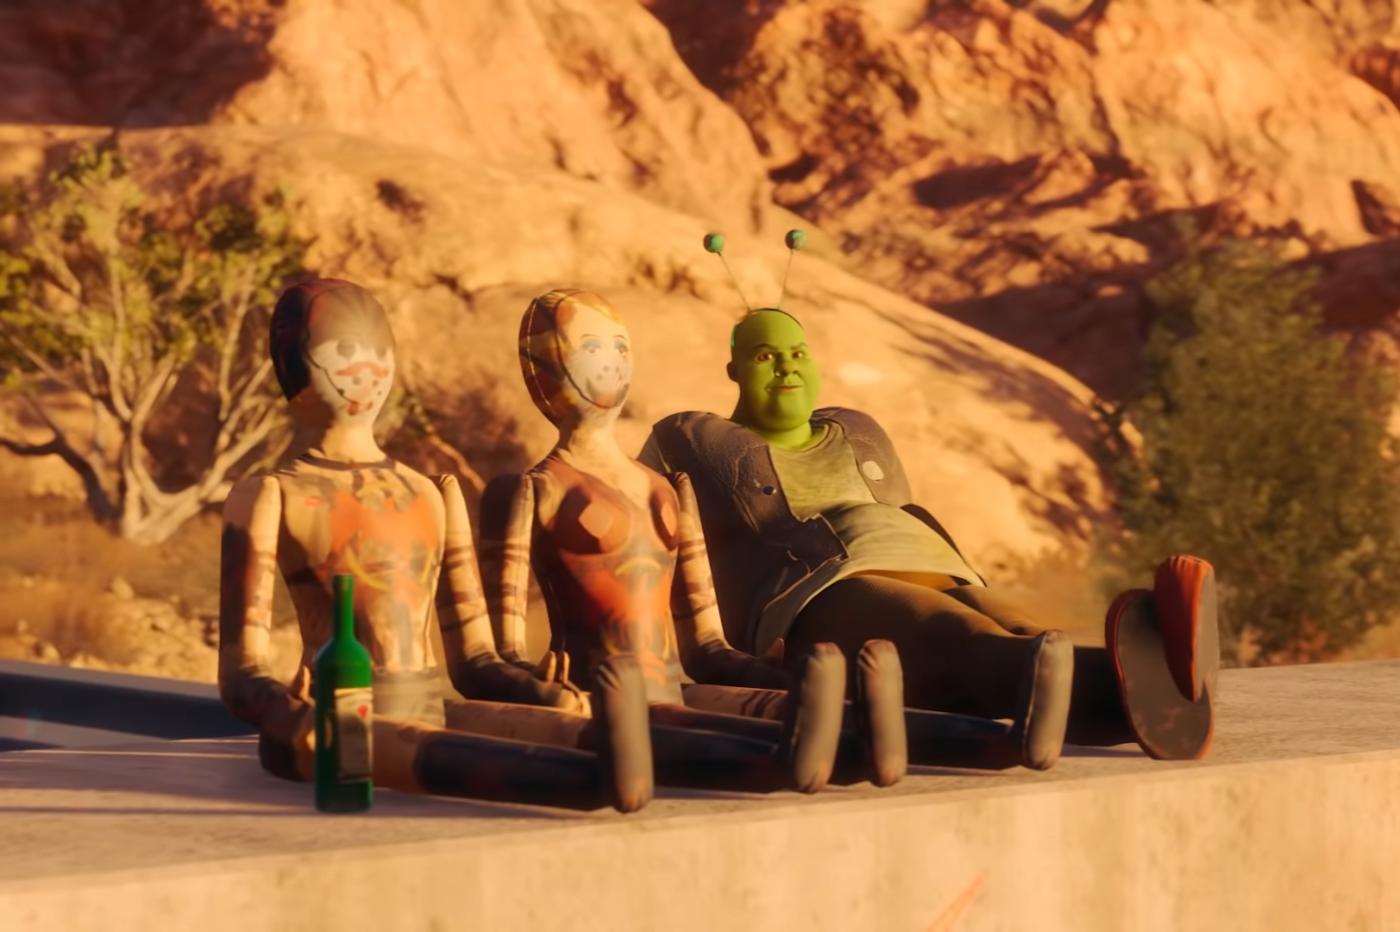 Character of the new Saints Row strongly resembling Shrek